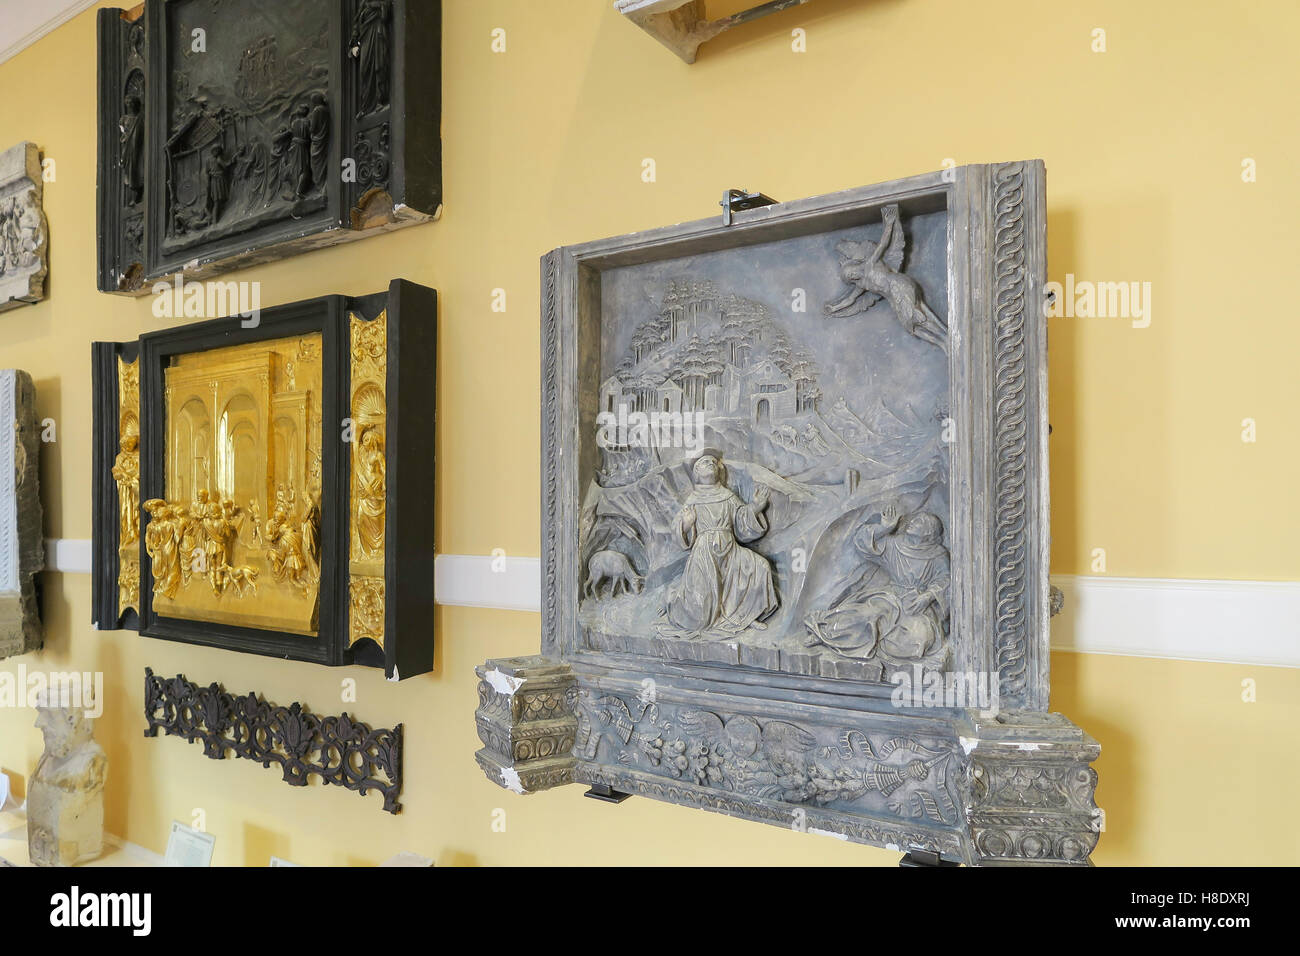 Institute of Classical Architecture & Art Cast Gallery, NYC Stock Photo